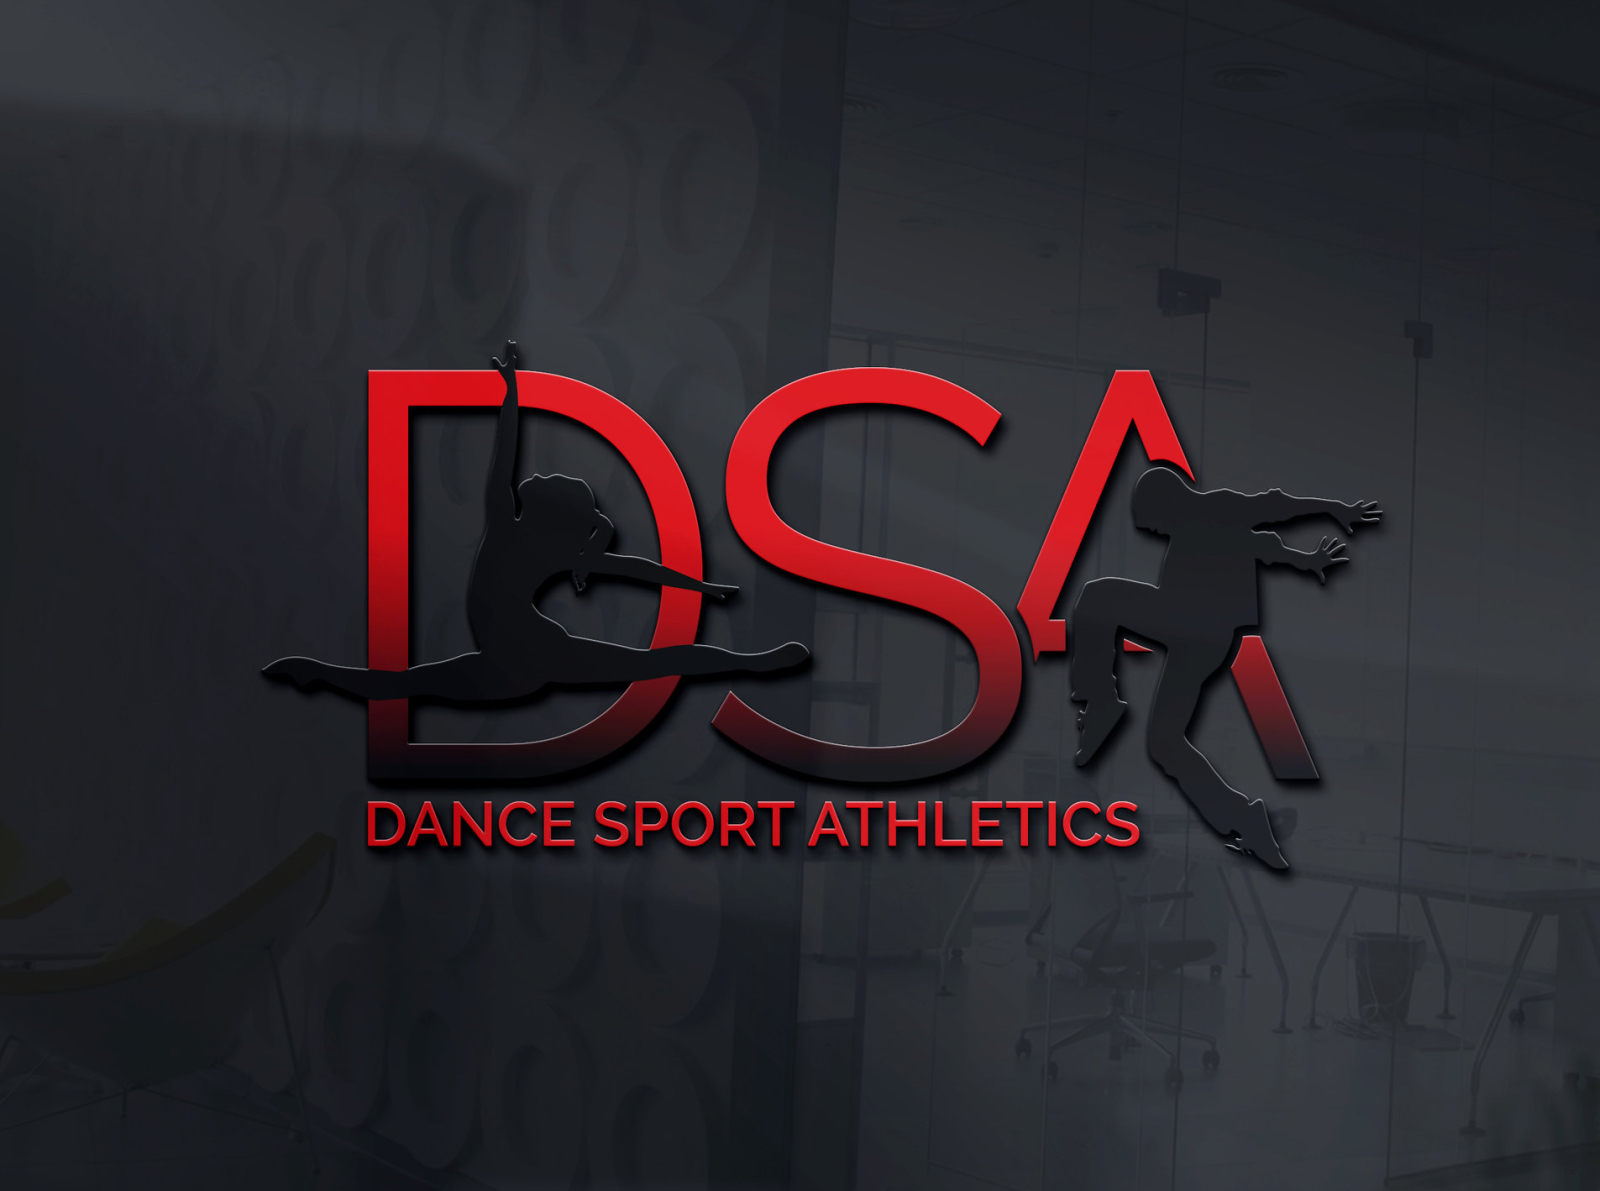 Dance Academy Projects | Photos, videos, logos, illustrations and branding  on Behance